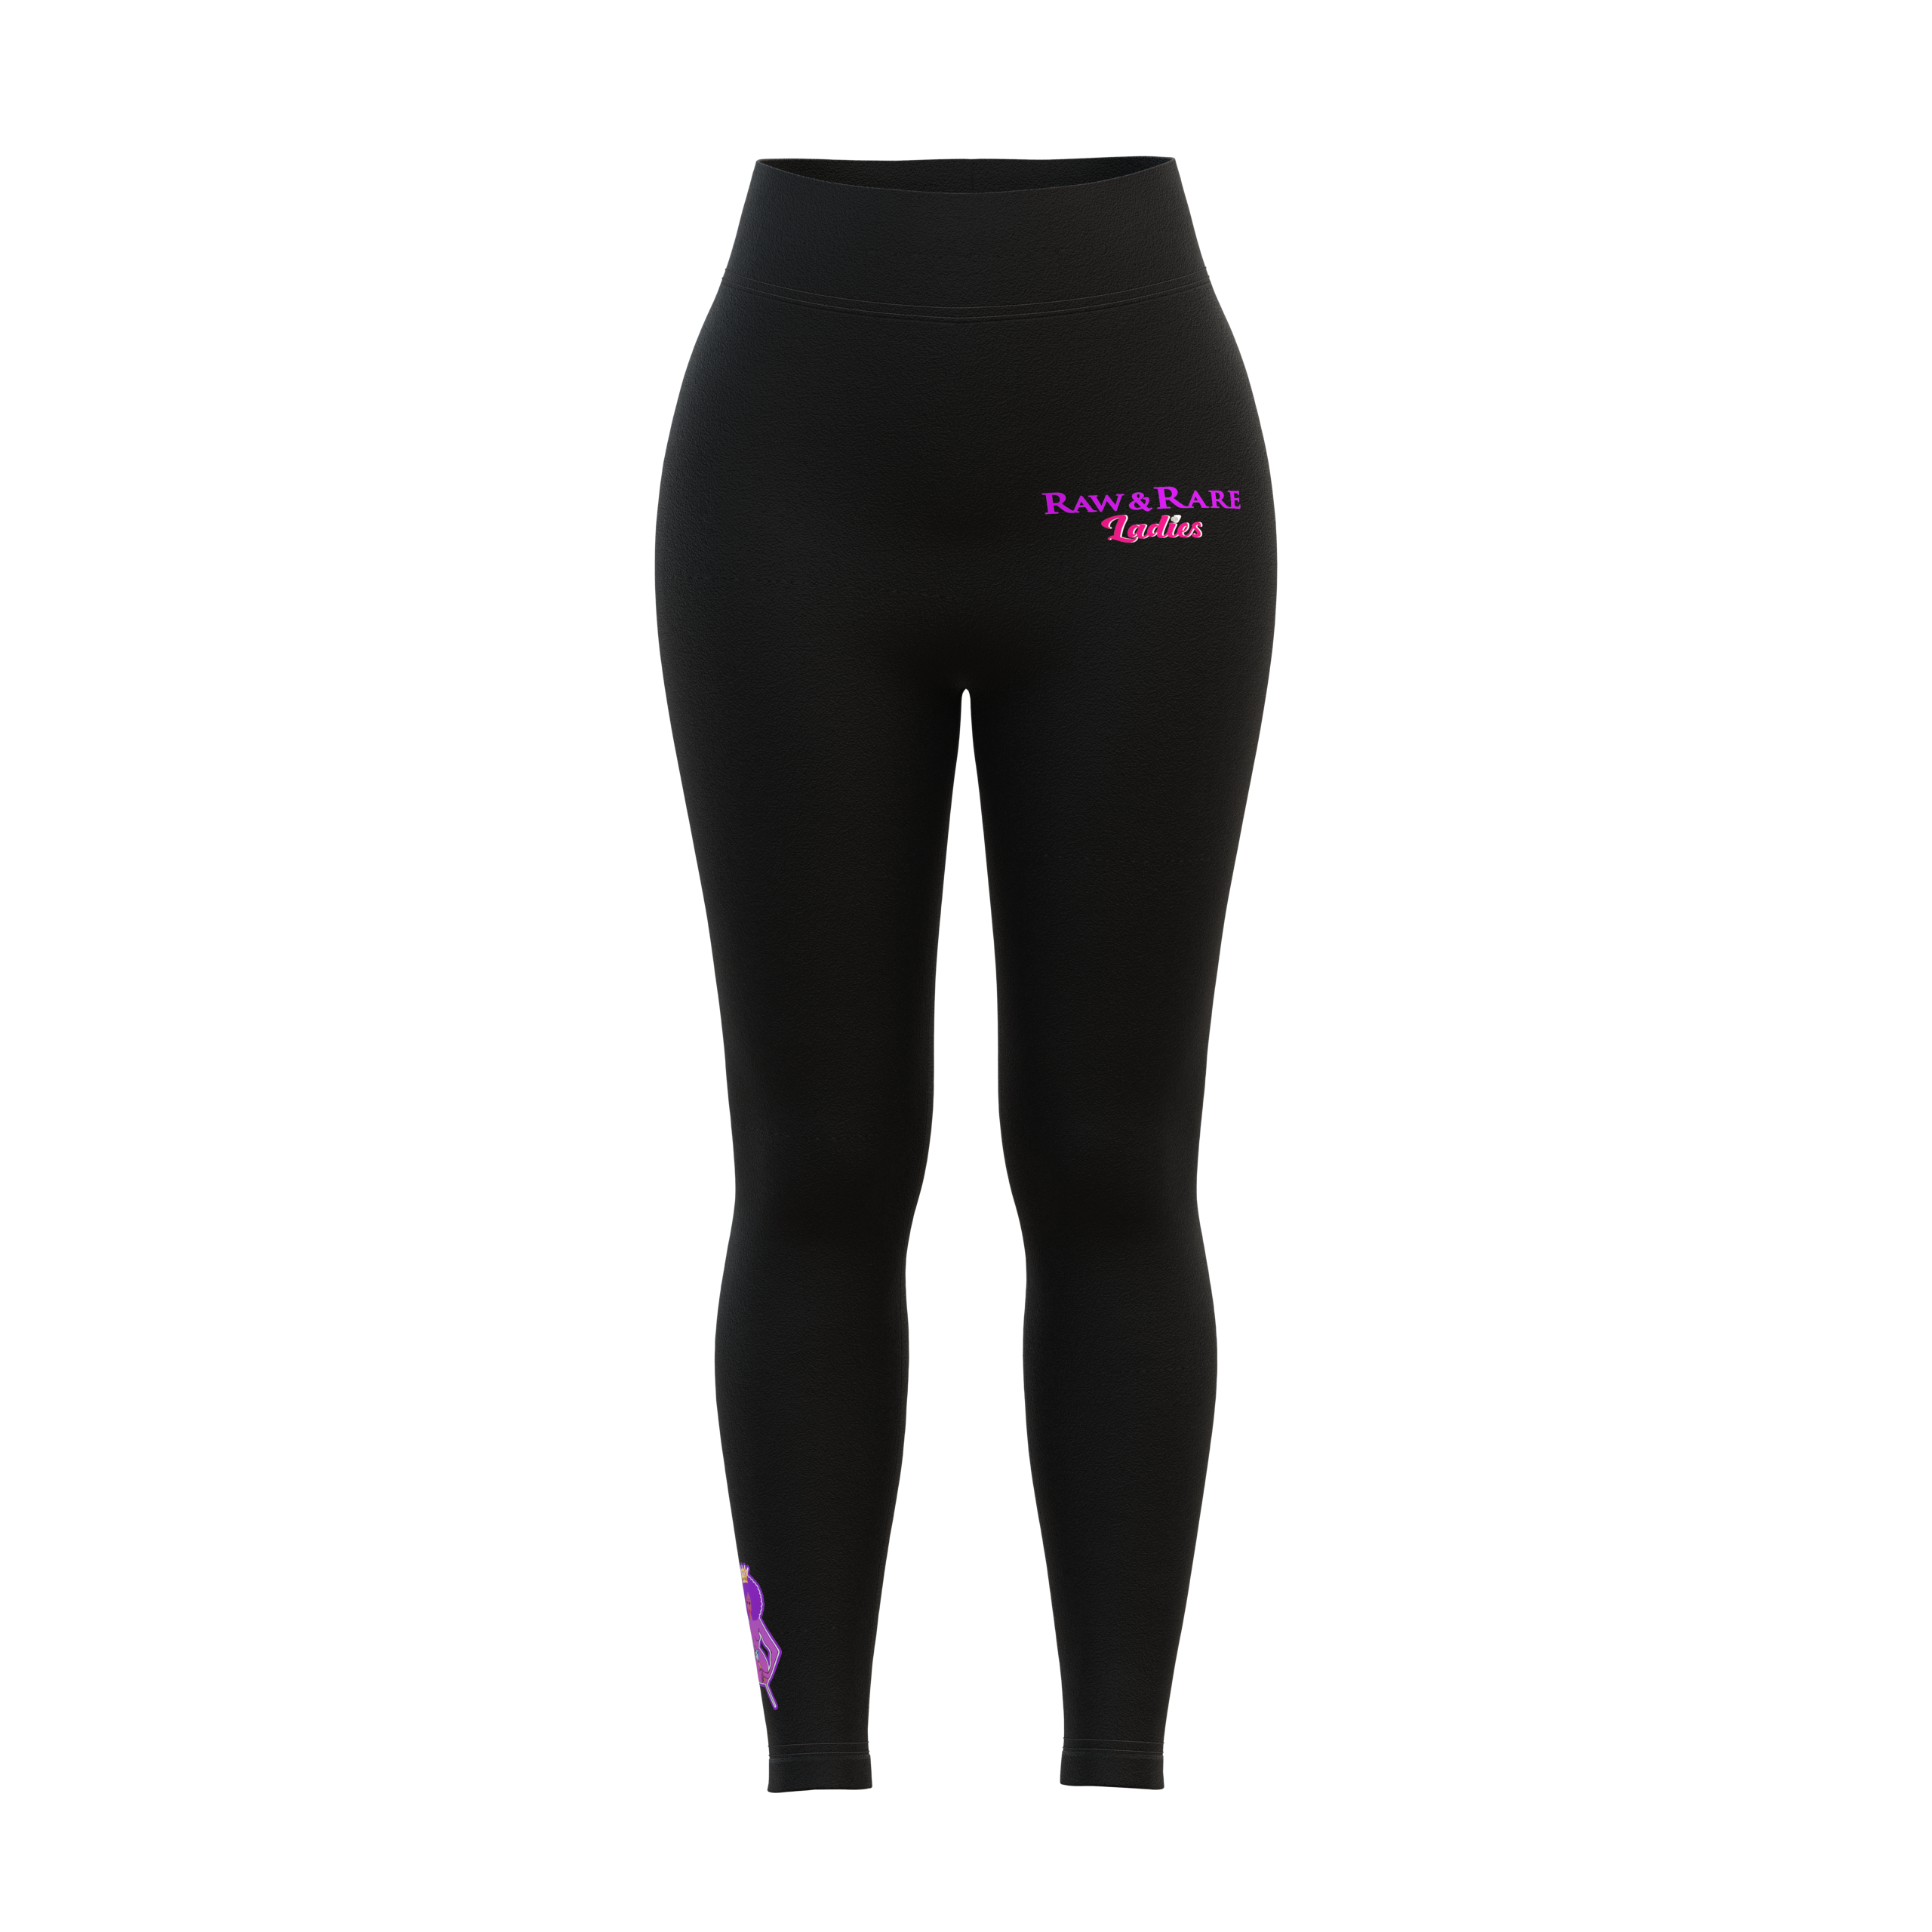 I'm fed up of wrecking leggings when climbing. What brand of leggings do  you ladies recommend? (preferably EU based companies) : r/climbergirls